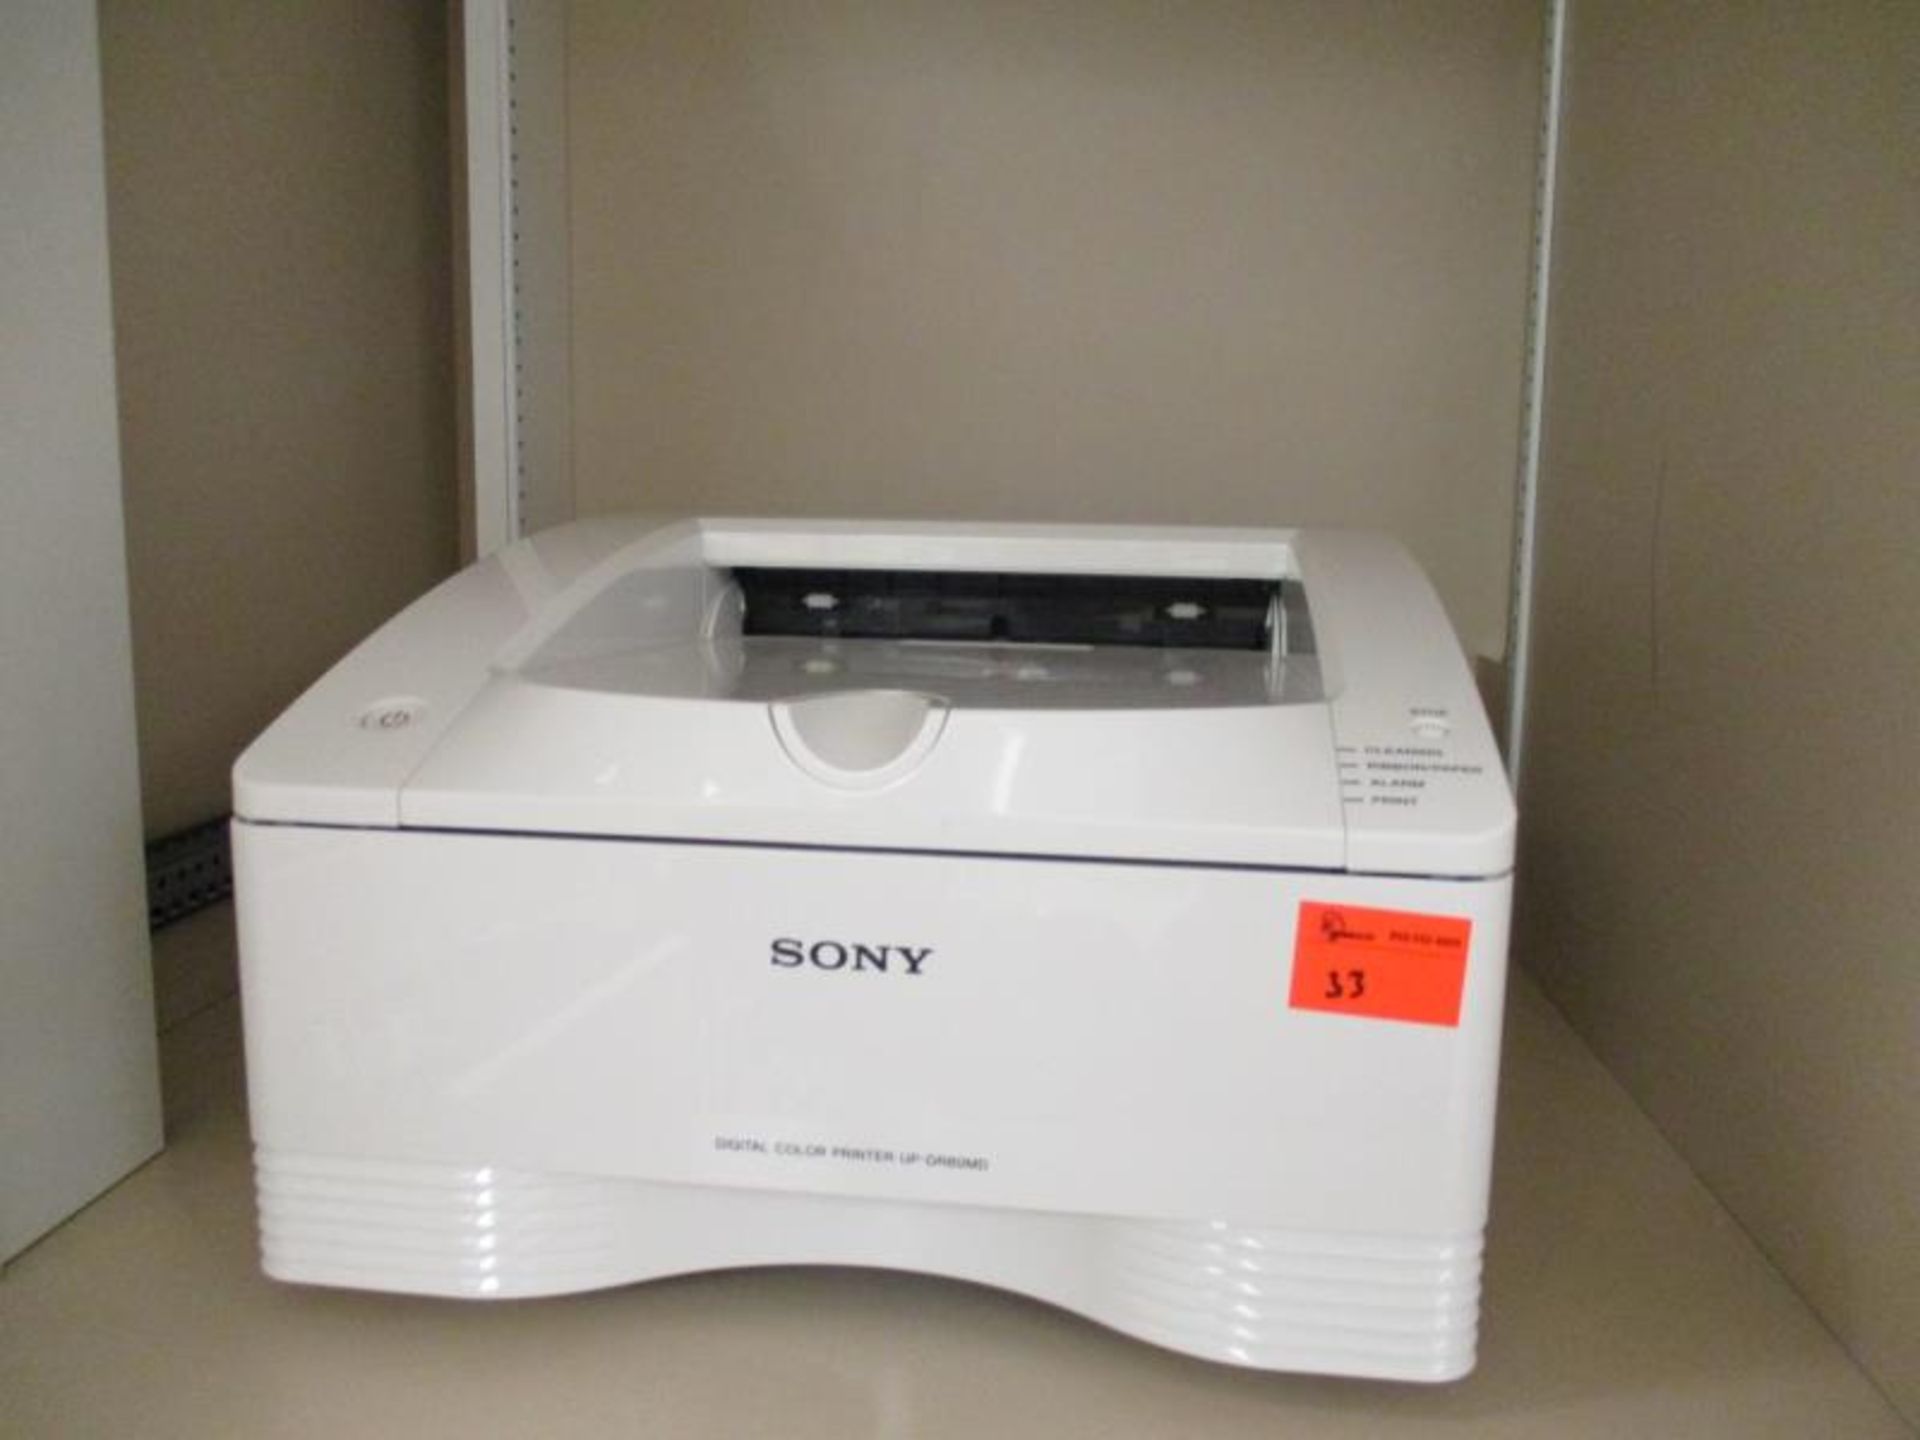 Sony Digital Color Printer, Model: UP-DR80MD, SN: 87647 w/ Roll of Paper